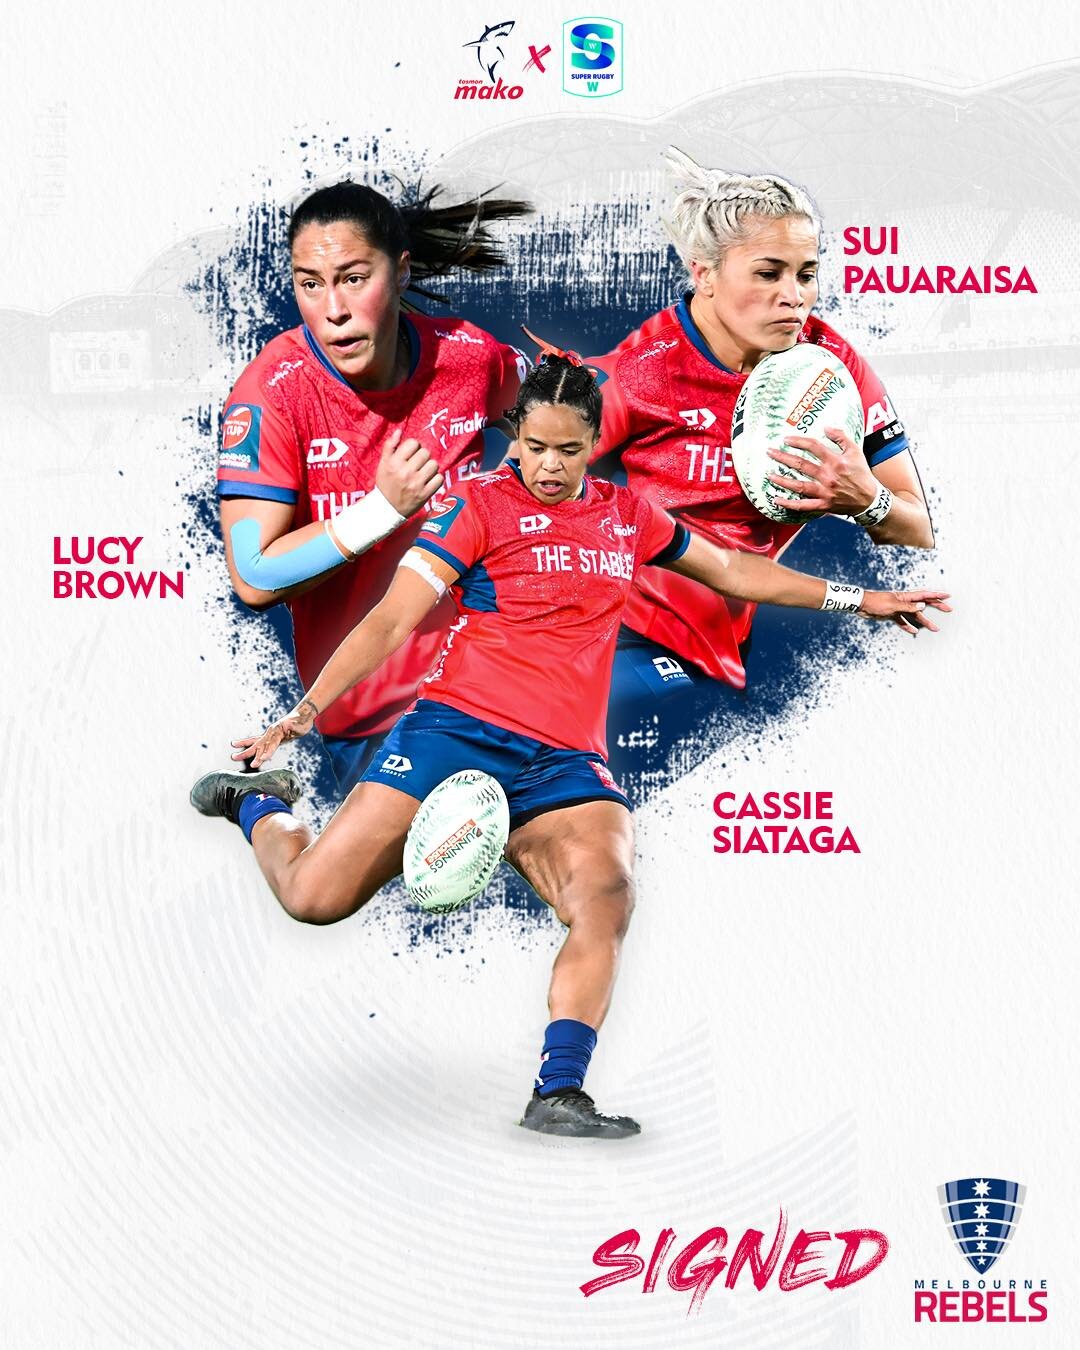 Super Rugby W signings 🔥
Congratulations to our 4 Mako wāhine who will be competing in this year&rsquo;s Super Rugby W competition 🦈 

📍 Lucy Brown, Cassie Siataga, &amp; Sui Pauaraisa have signed with the Melbourne Rebels. They will take on the W